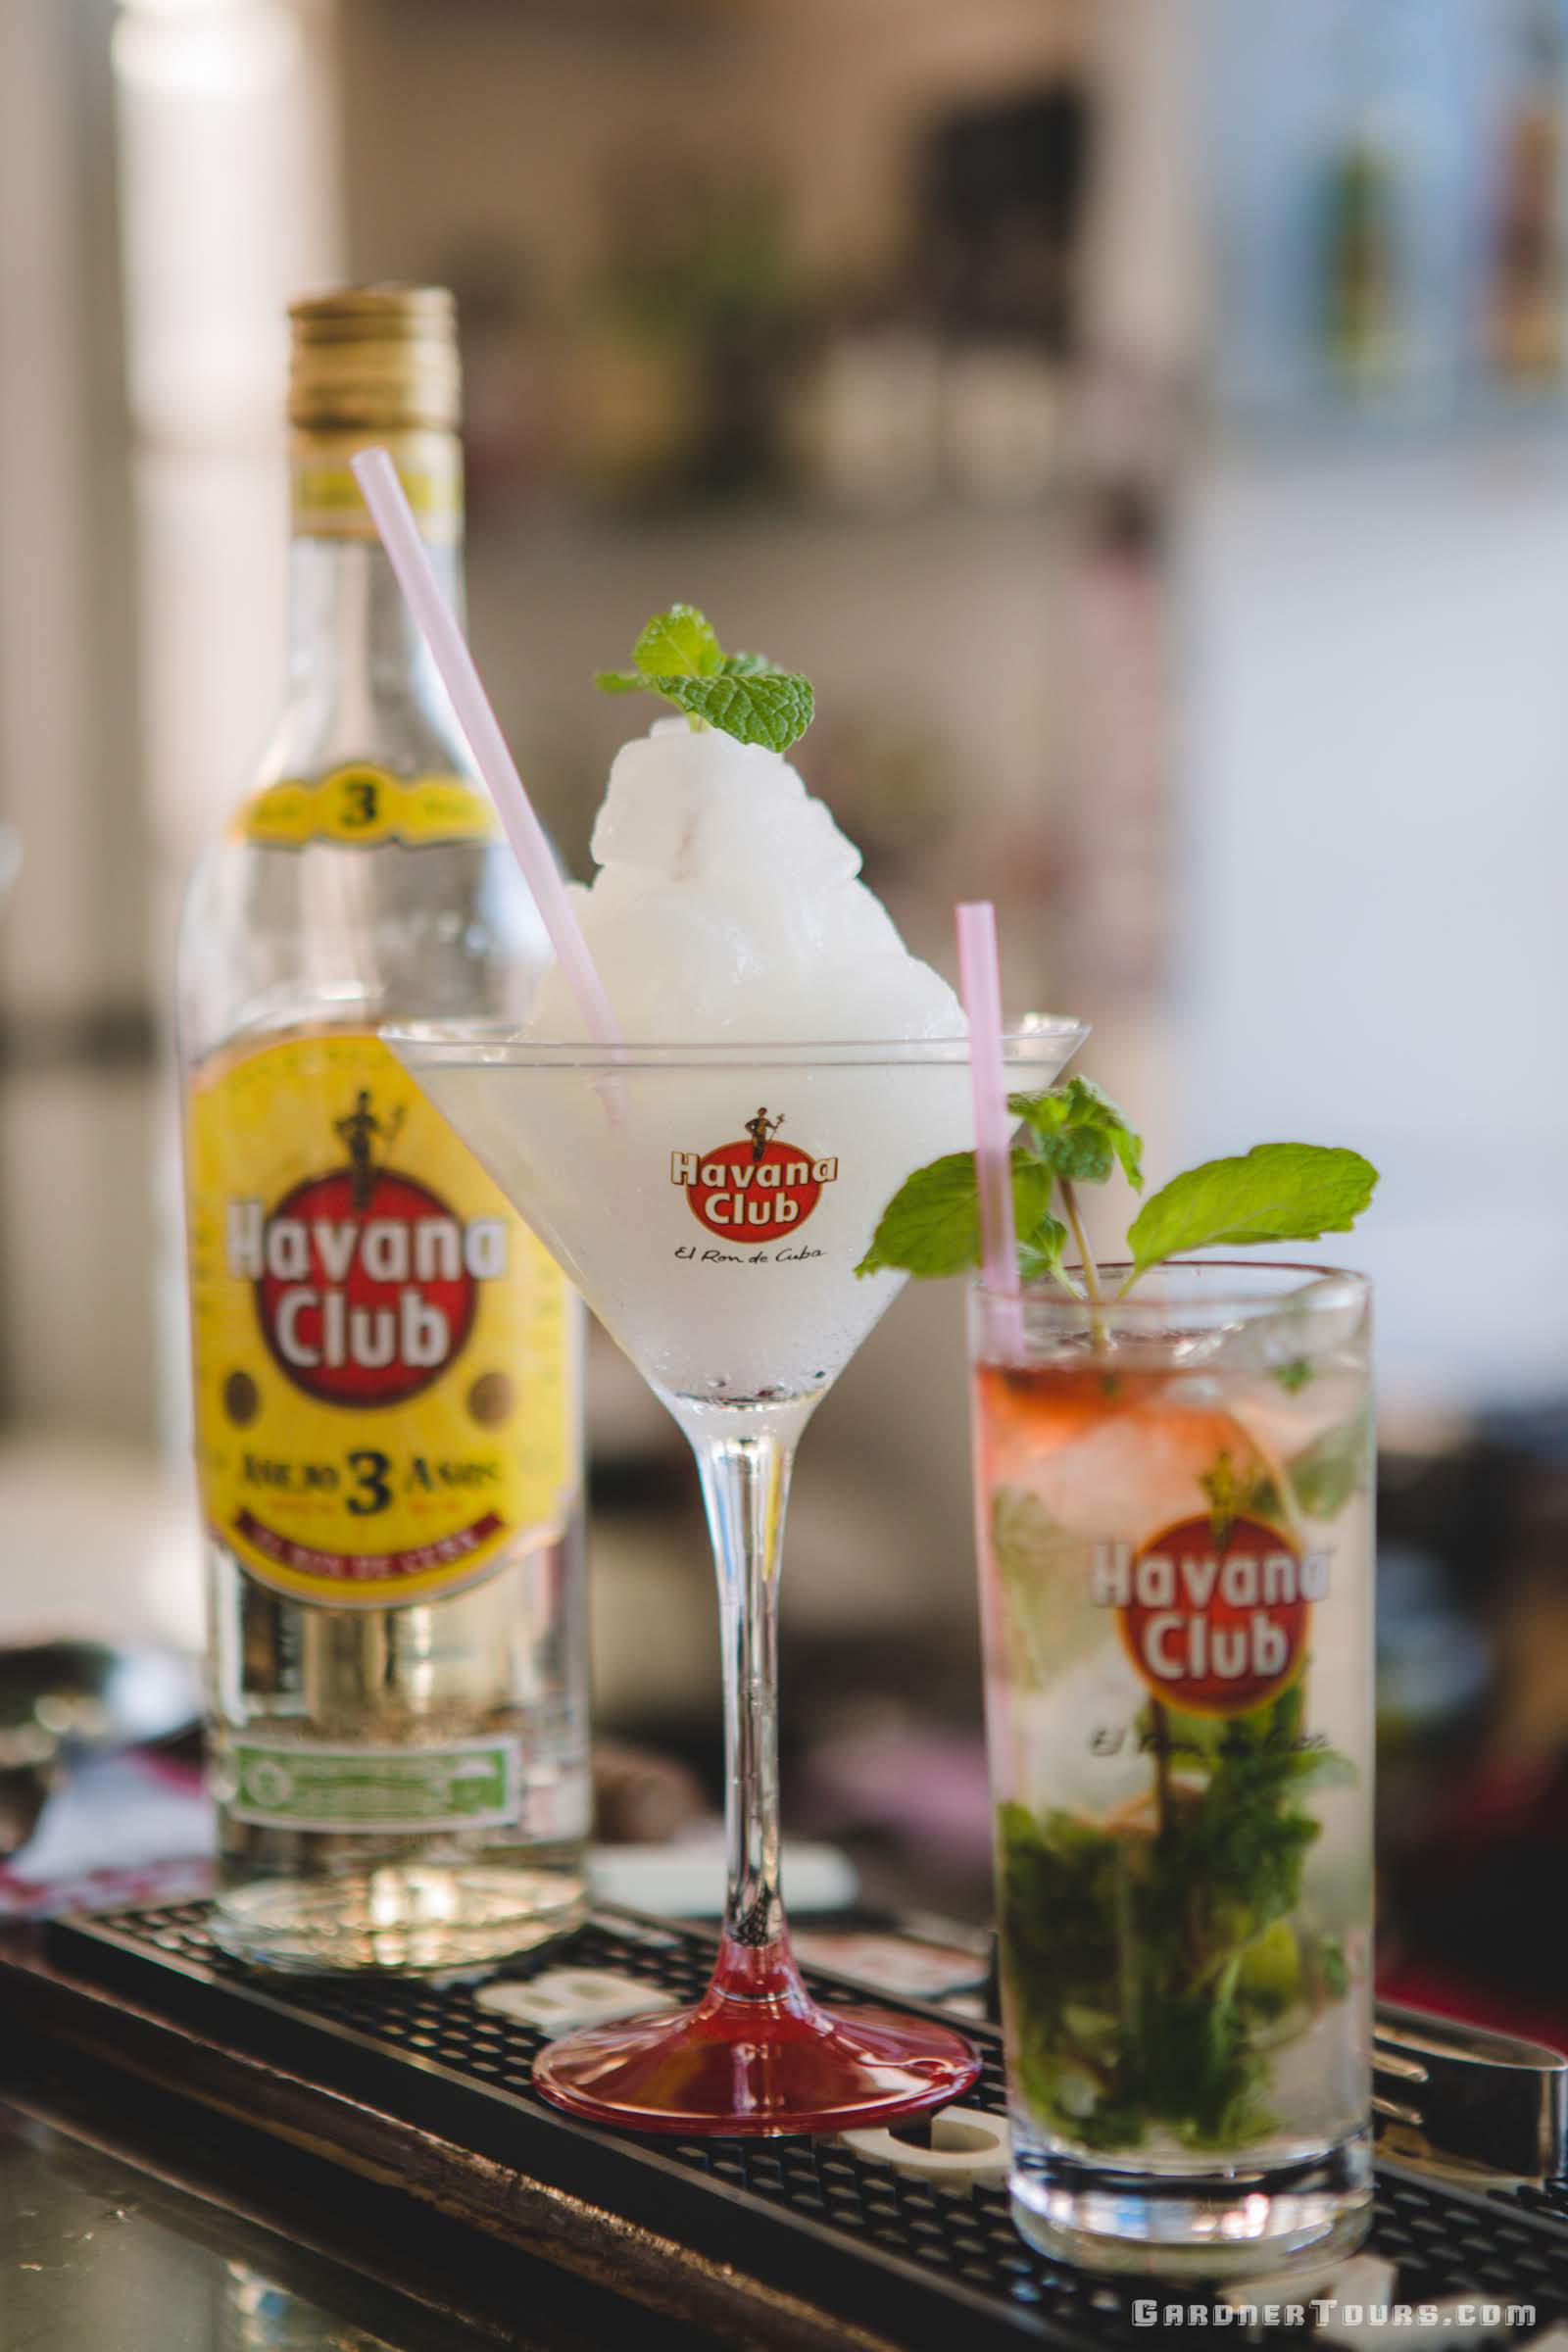 A Frozen Daiquiri, a Mojito, and a Bottle of Havana Club 3 Year White Rum on a Rooftop during a Cuban Cocktail Lesson in Old Havana, Cuba